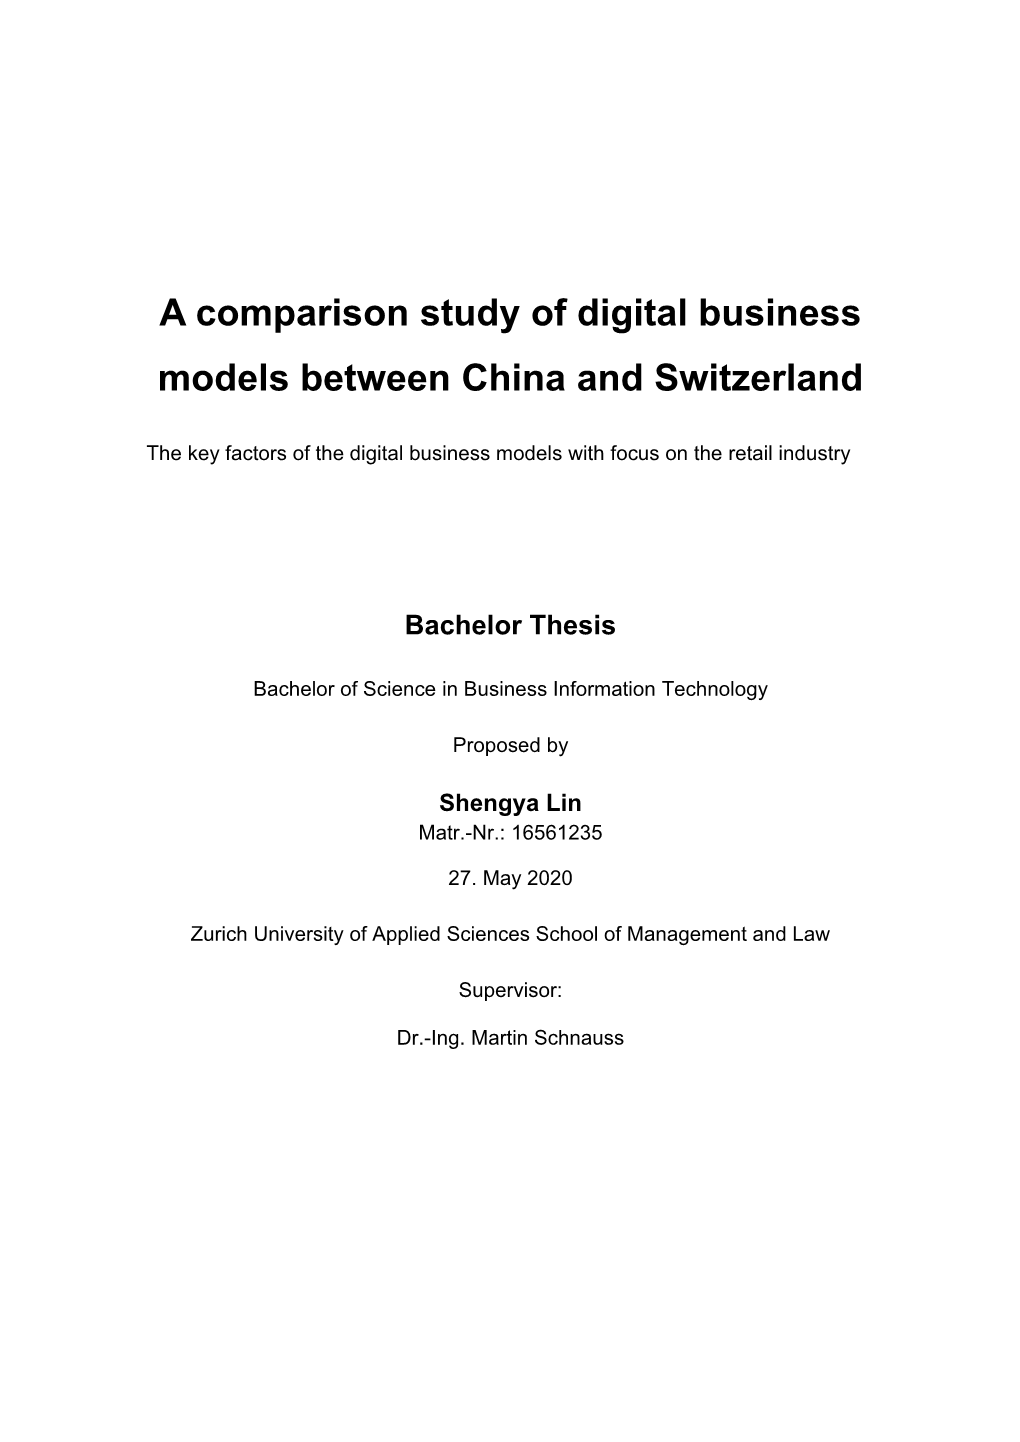 A Comparison Study of Digital Business Models Between China and Switzerland